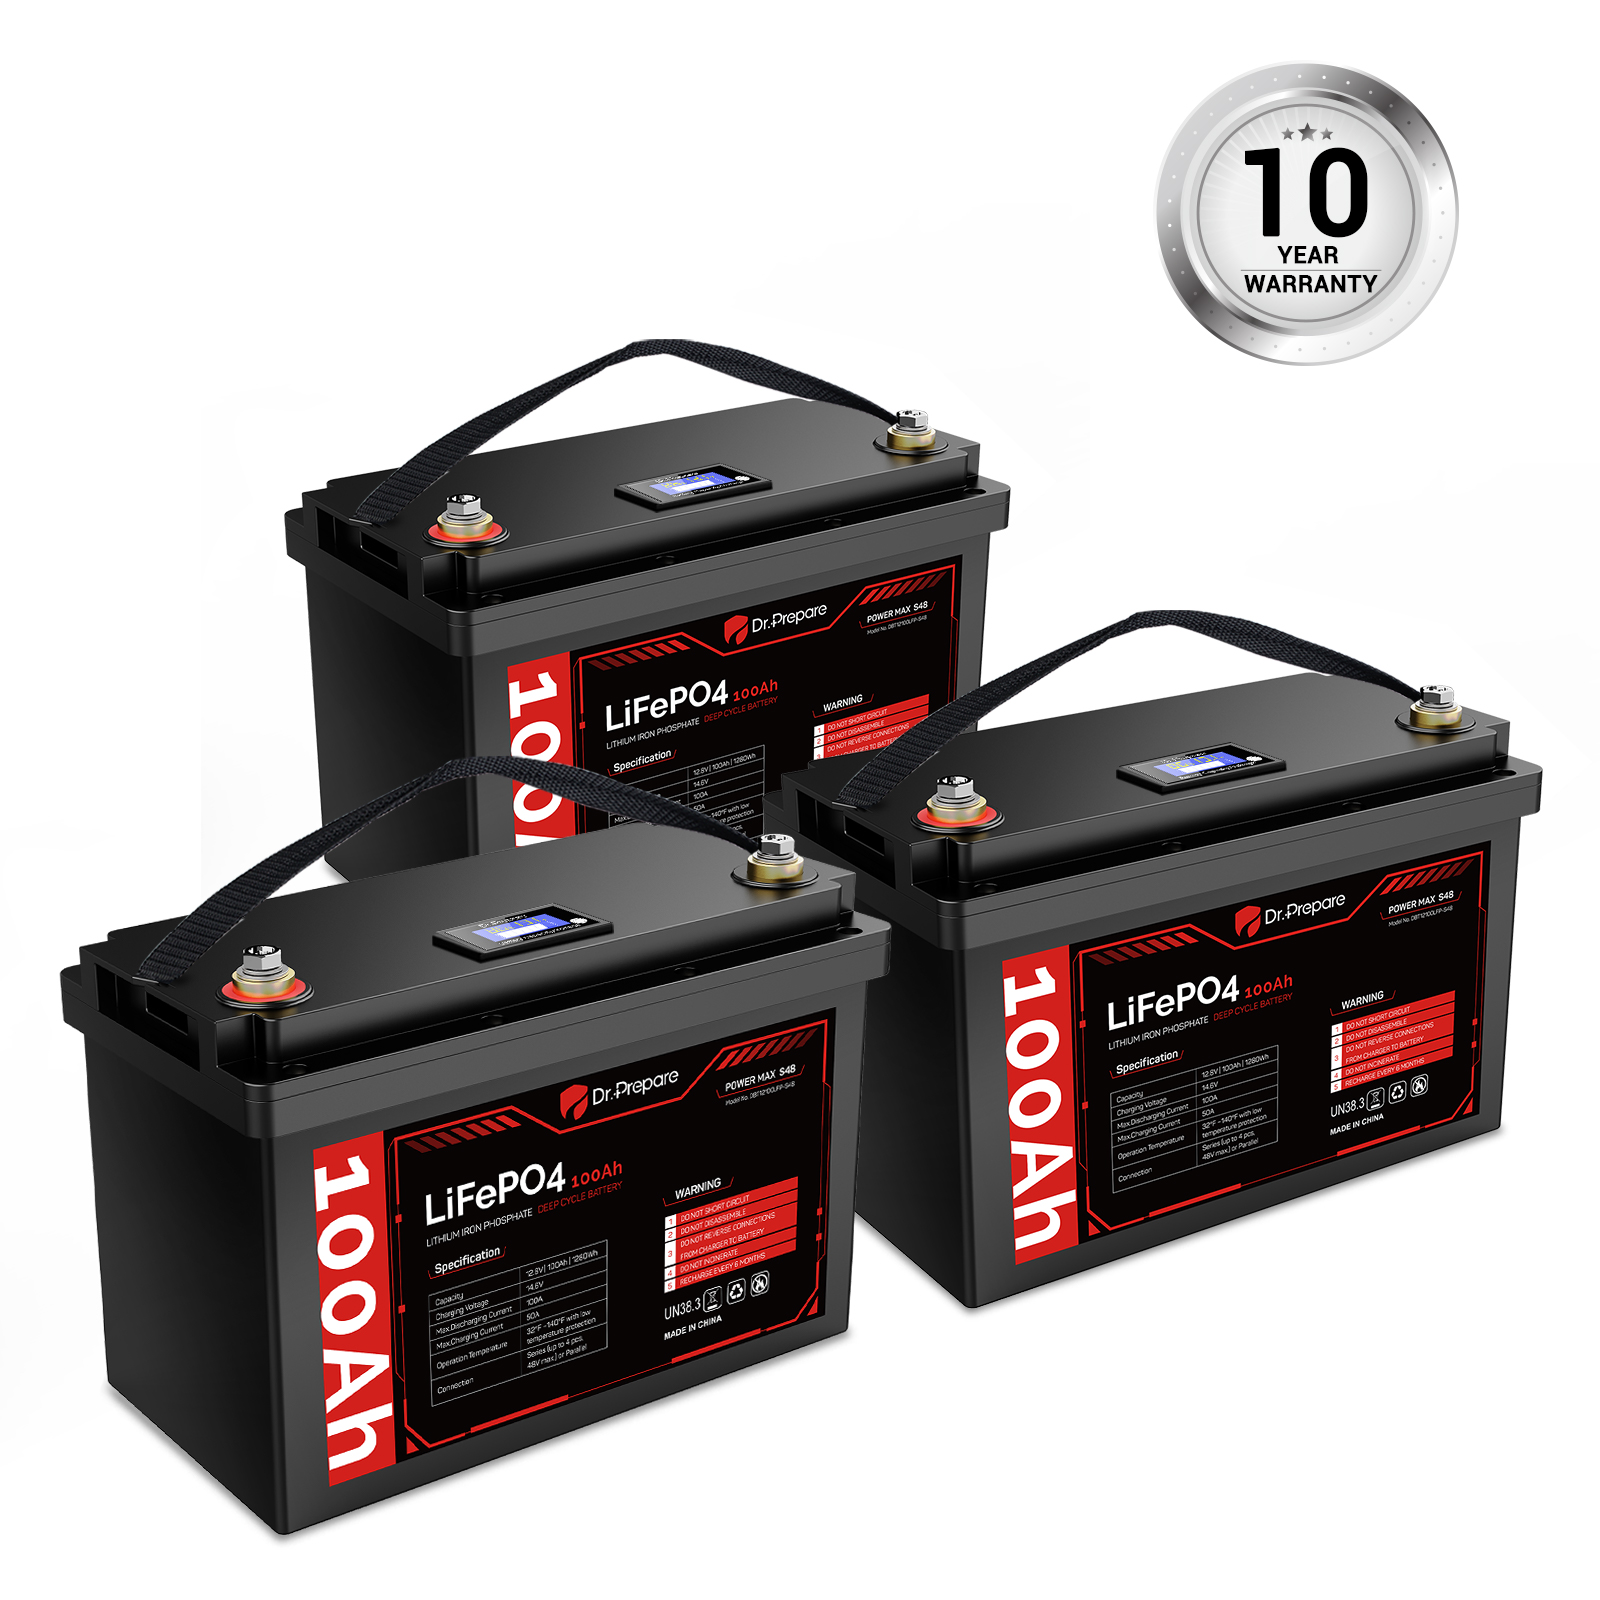 Multiple packs 100Ah LiFePO4 Lithium Deep Cycle Battery with LED Screen -  Connect In Series [10-year Warranty]